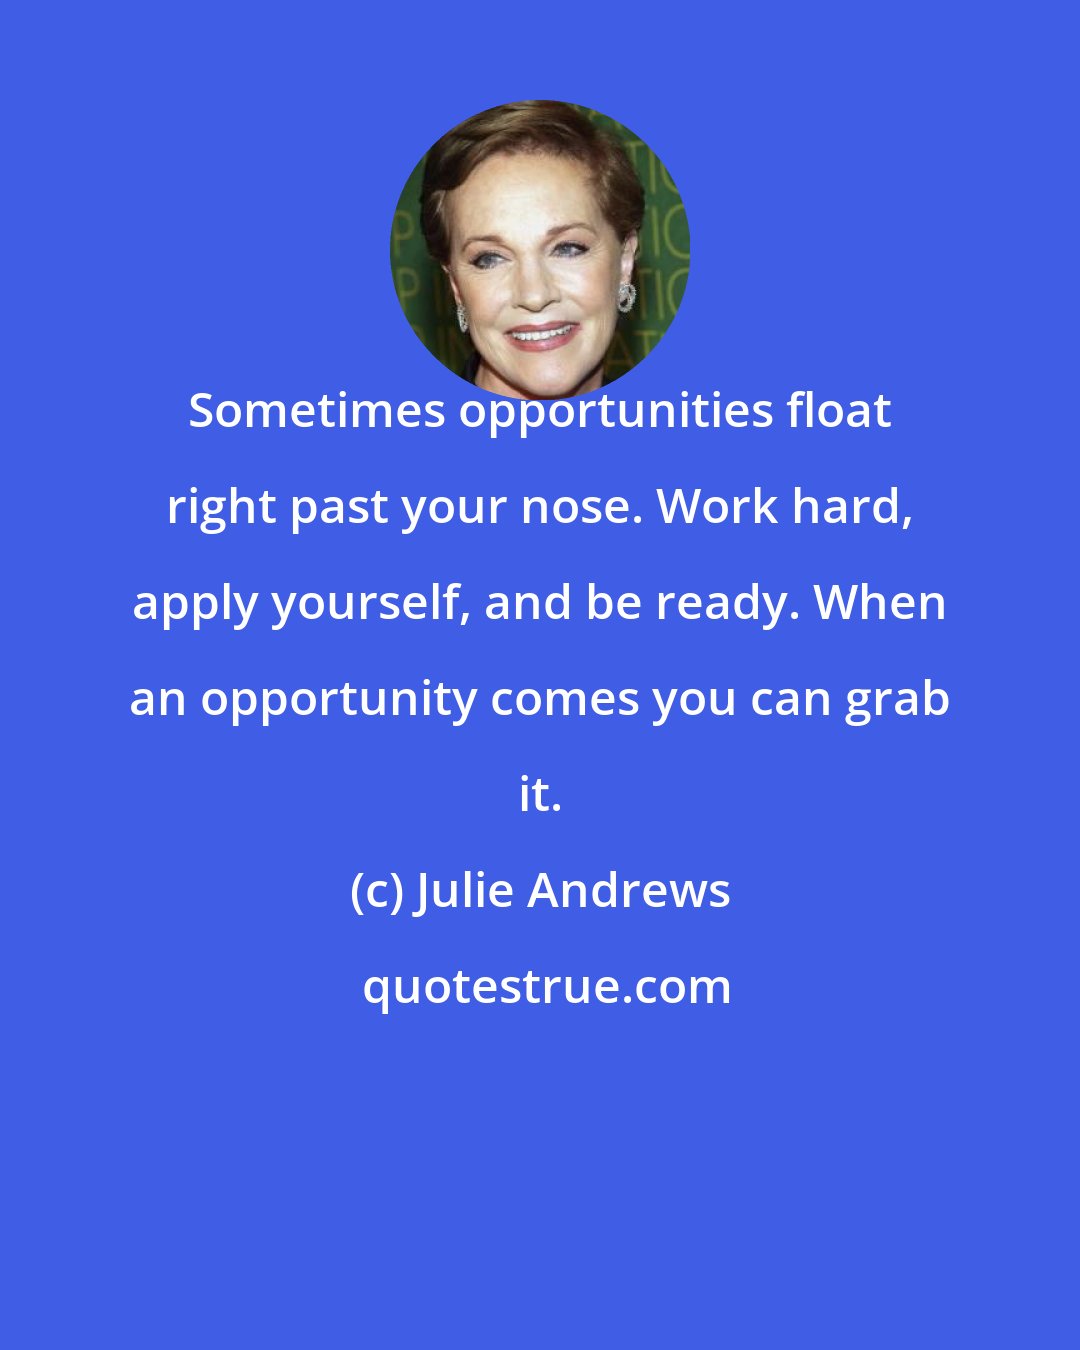 Julie Andrews: Sometimes opportunities float right past your nose. Work hard, apply yourself, and be ready. When an opportunity comes you can grab it.